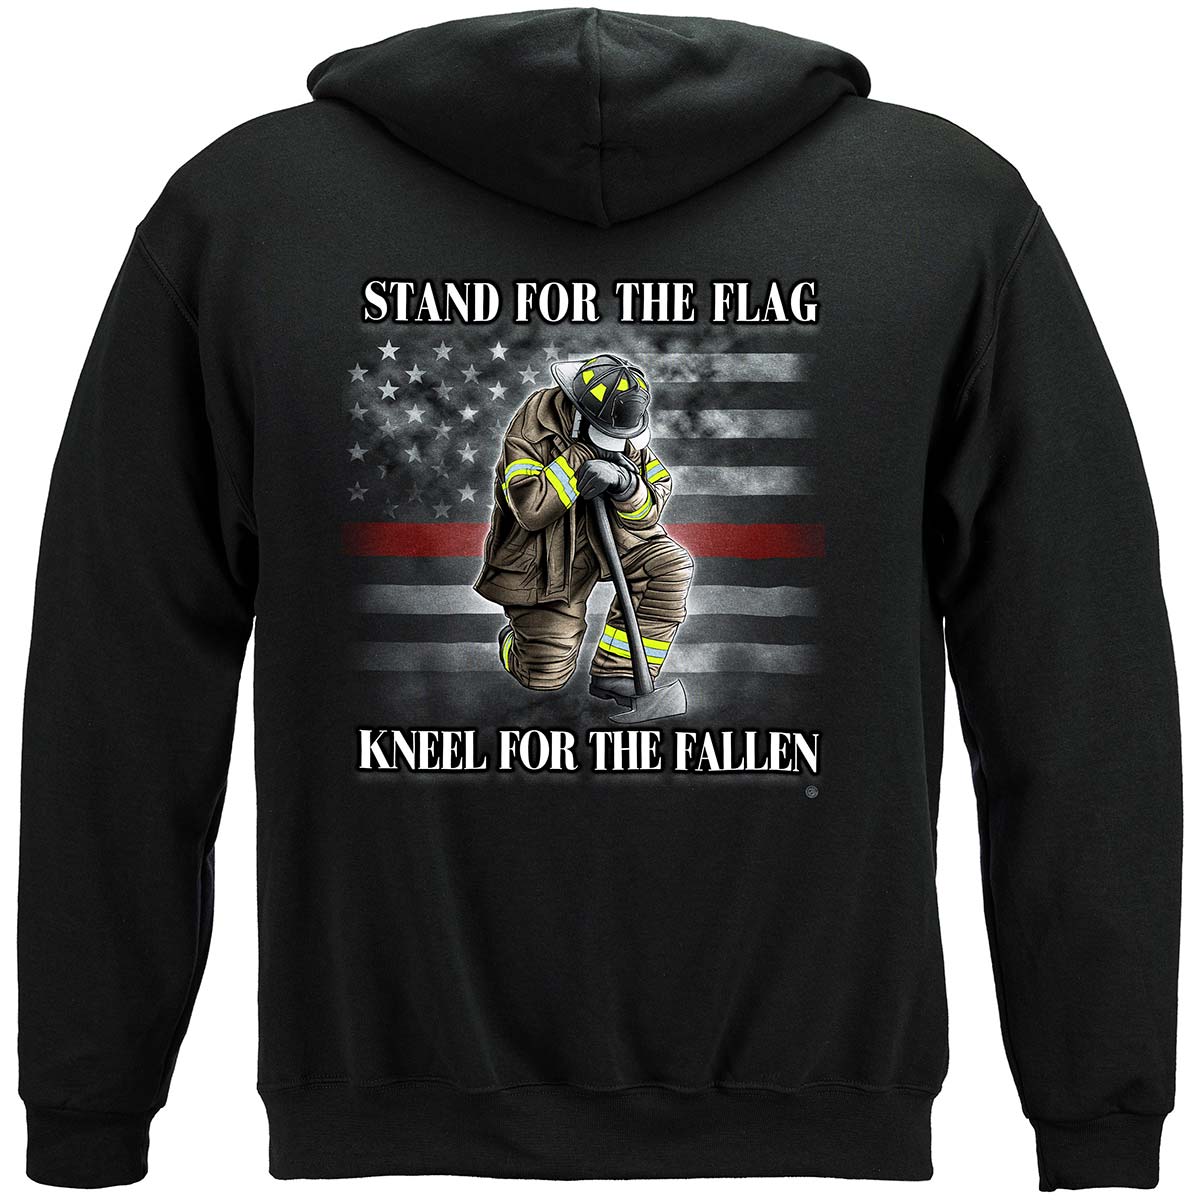 Firefighter I Stand for the Flag kneel for the fallen Premium Hooded Sweat Shirt